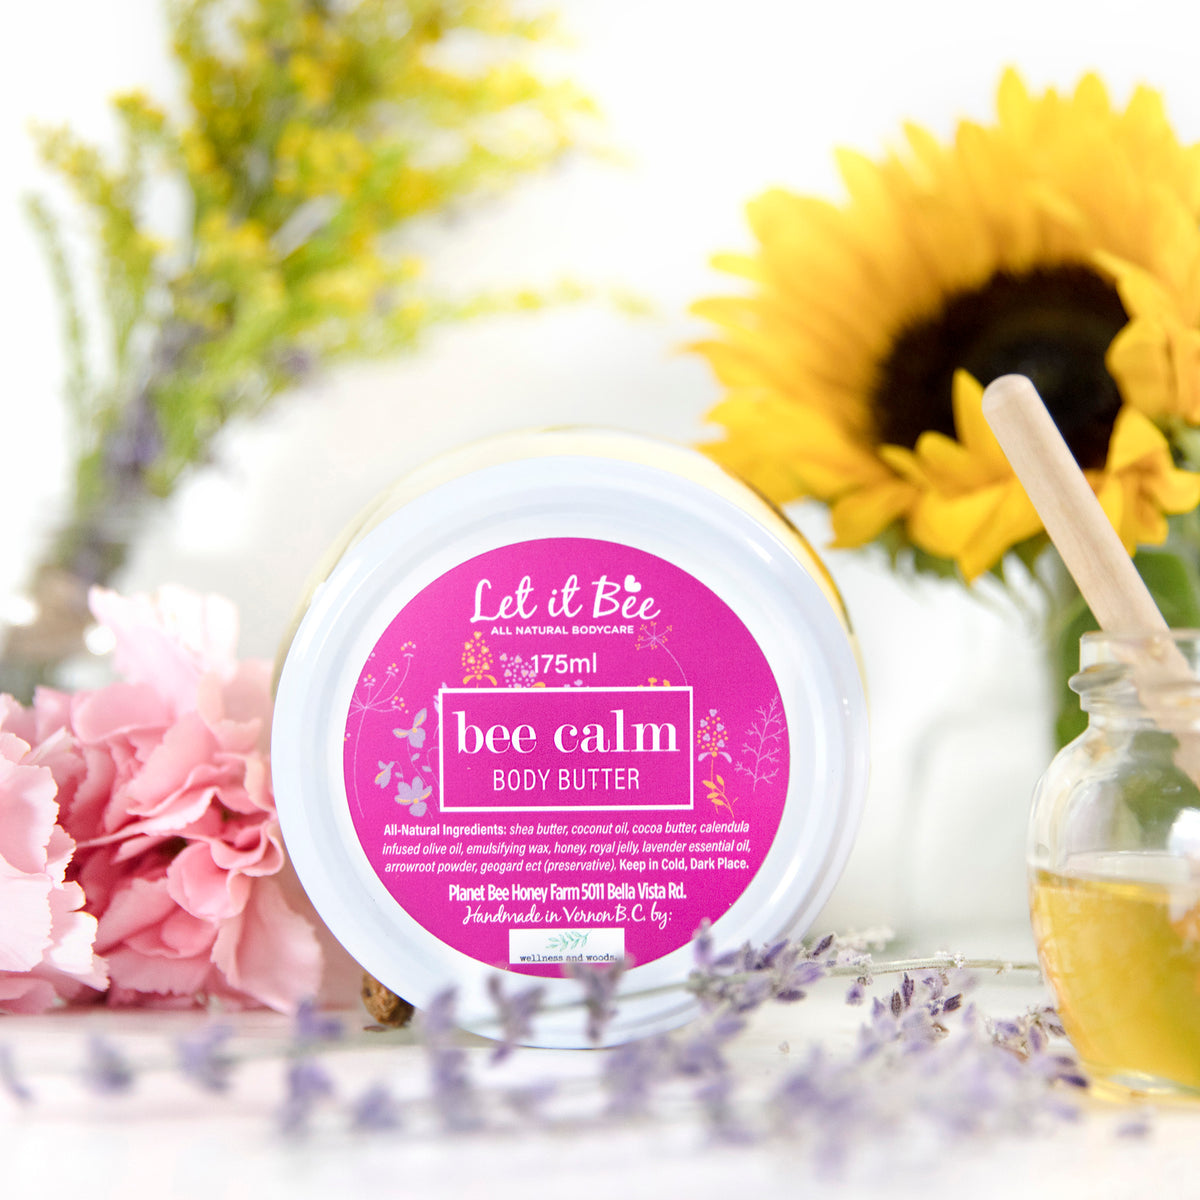 Bee calm Body butter with honey and royal jelly